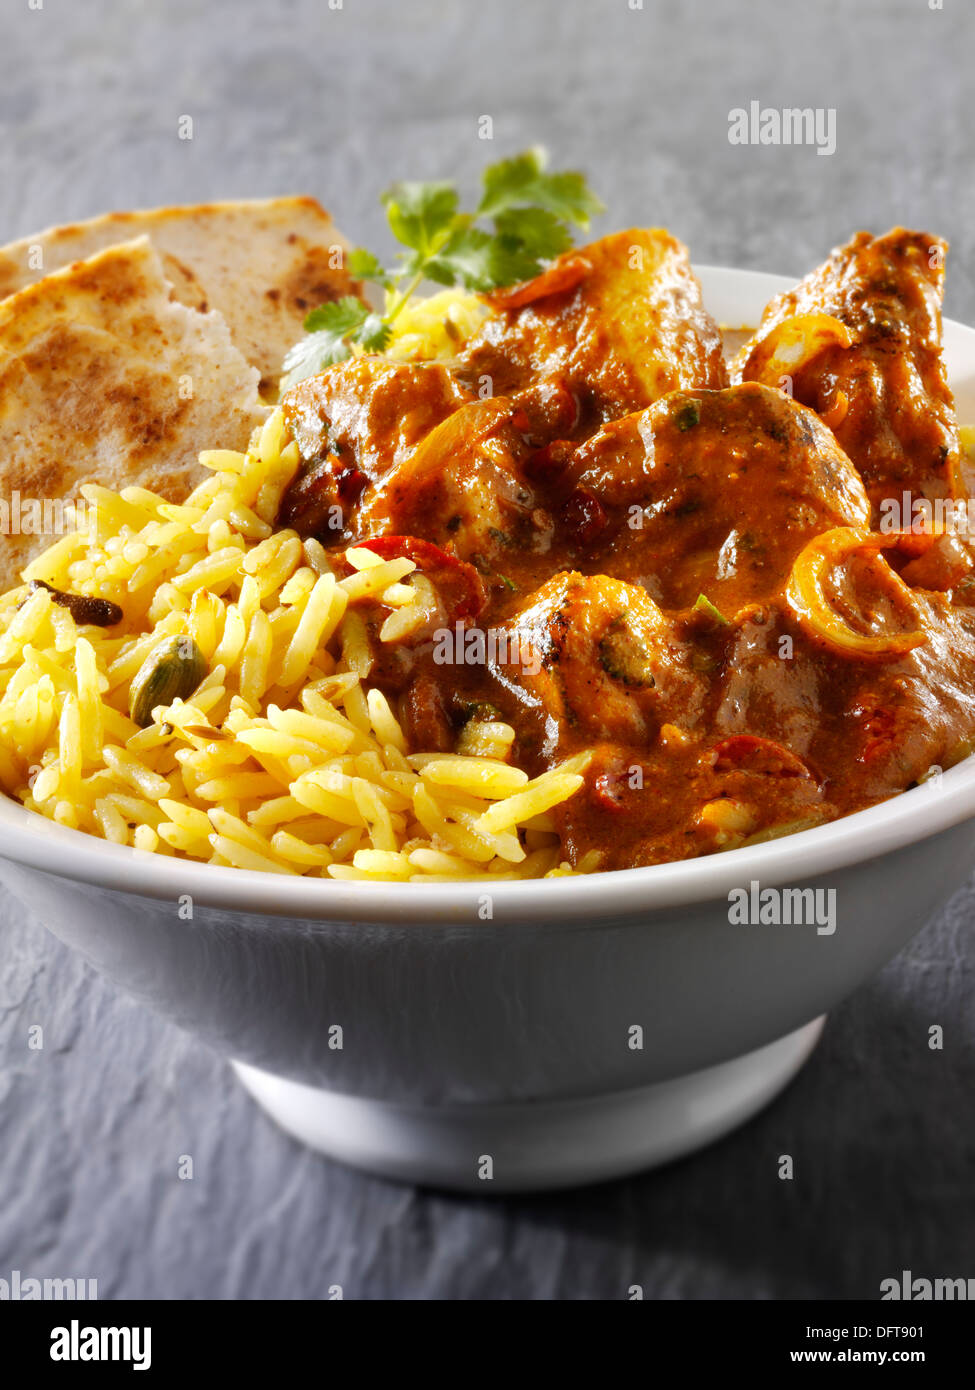 Balti Chicken Indian Curry and pilau rice Stock Photo